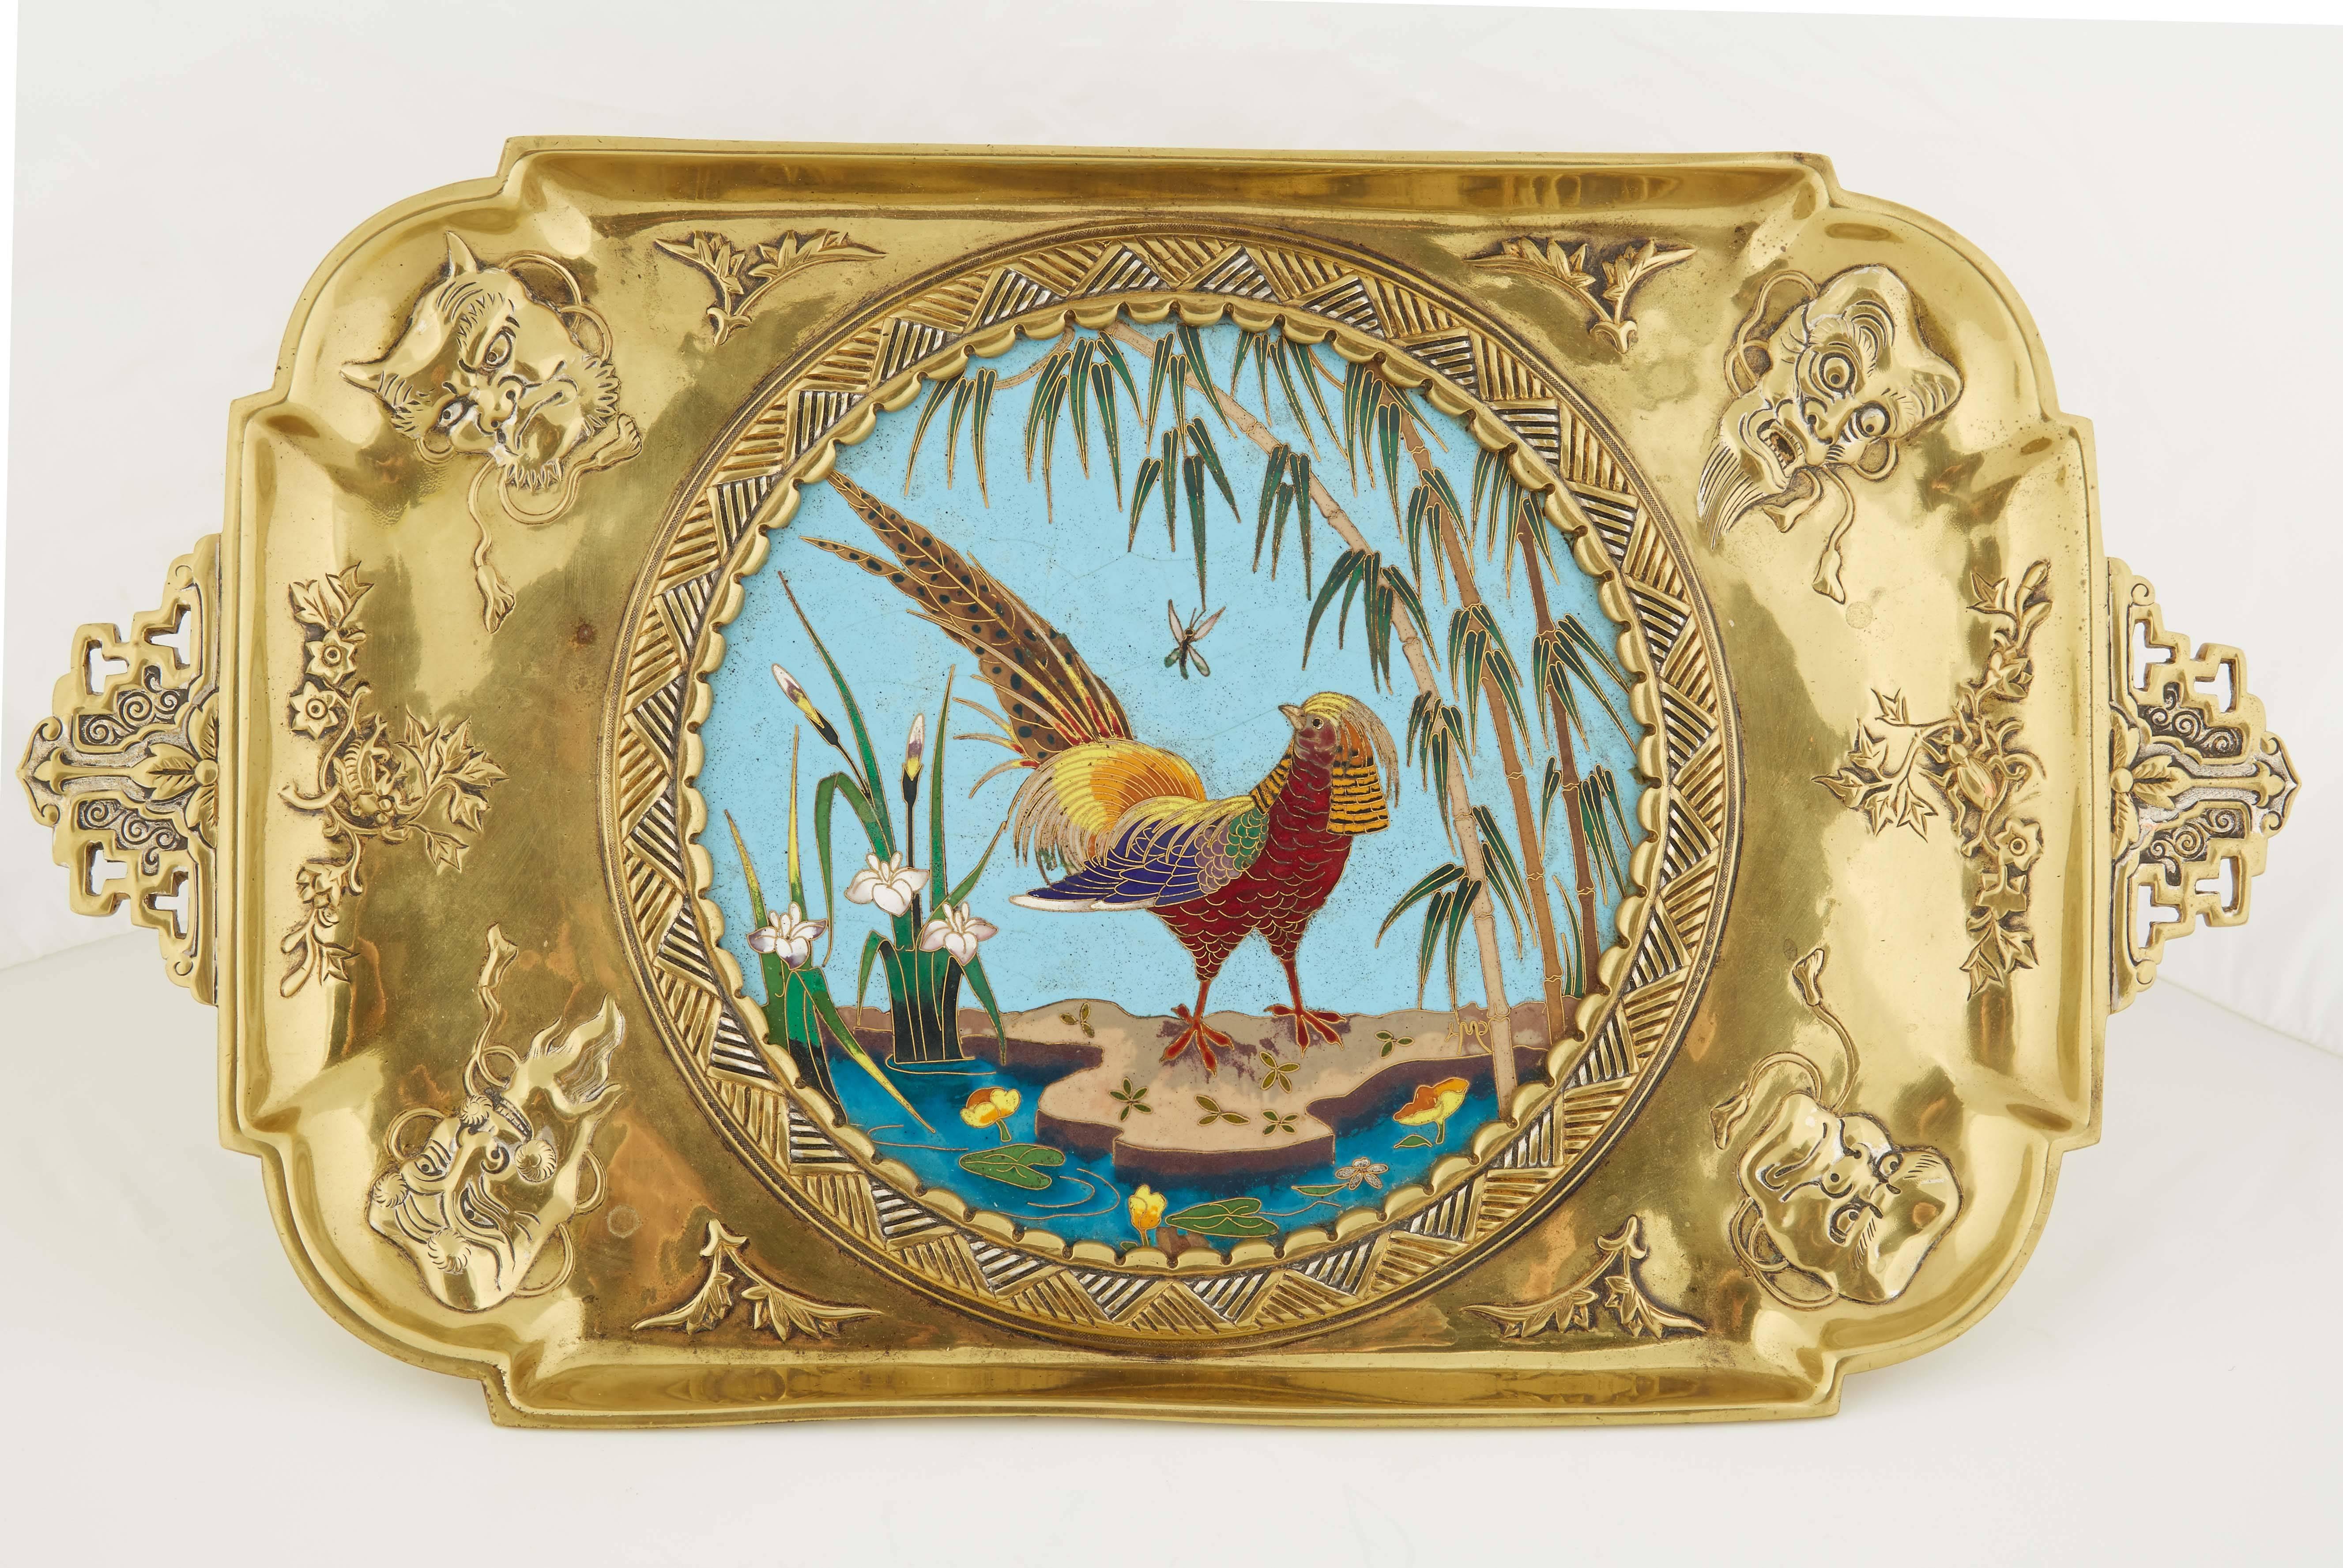 A rare French Japonisme ormolu and Cloisonné enamel tray by Edouard Lievre.

The enamel medallion depicting a pheasant in a garden.

Signed HMP.

Very finely cast with masks and silver highlights.